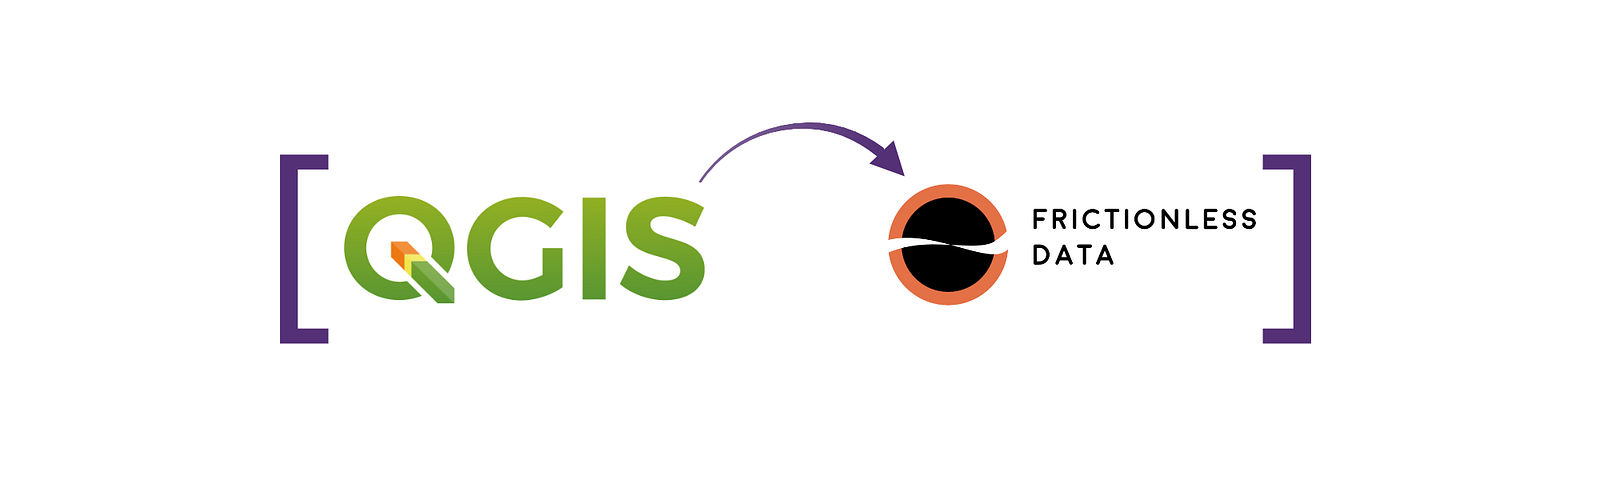 QGIS logo with arrow pointing towards Frictionless Data logo in brackets.